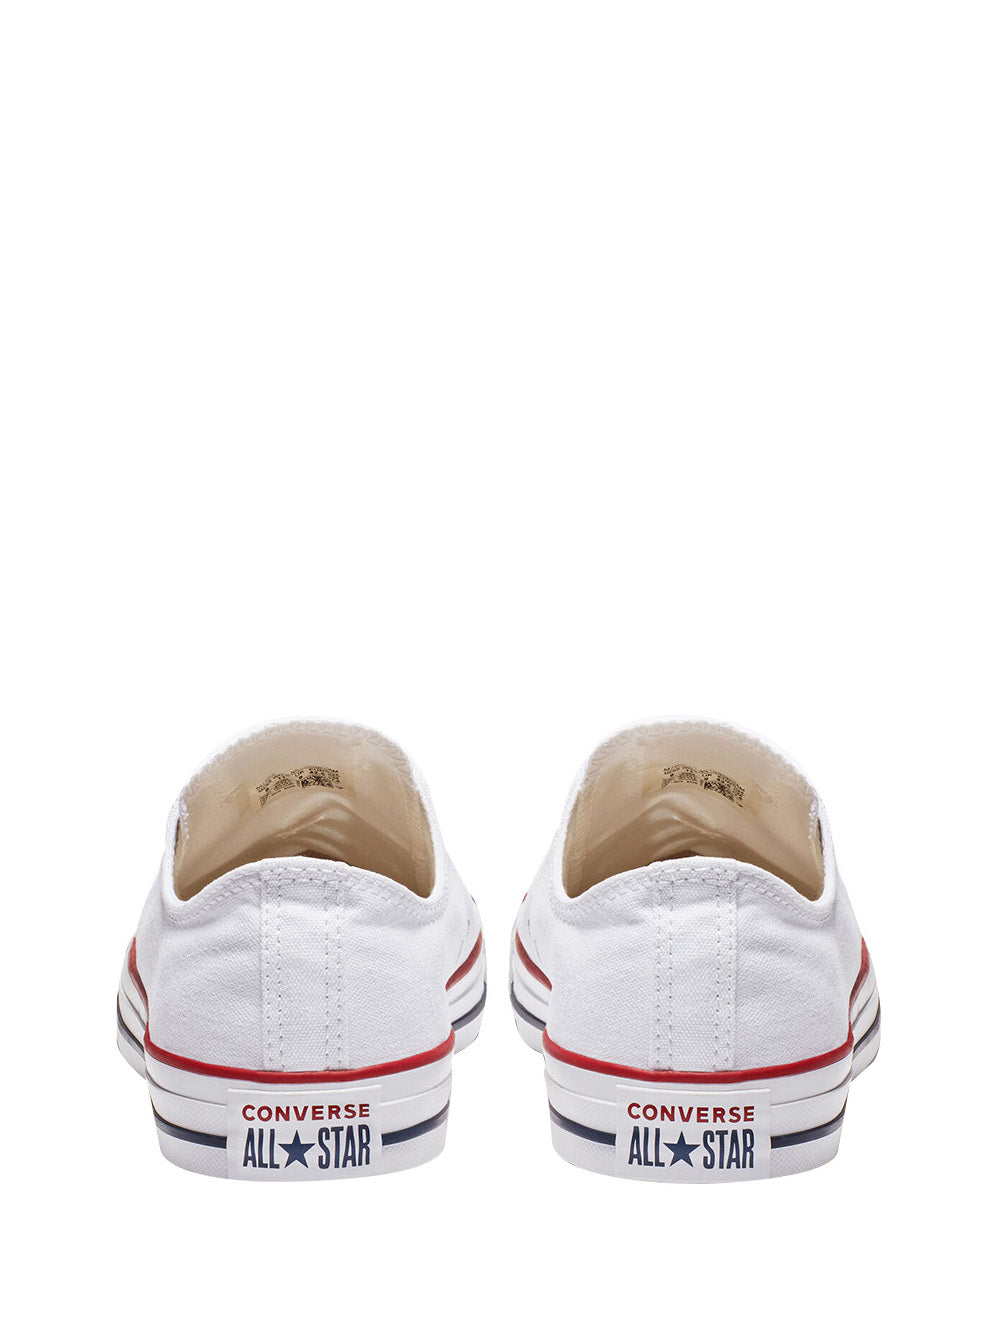 Sneakers Chuck Taylor All Star Classic Low Top Bianco